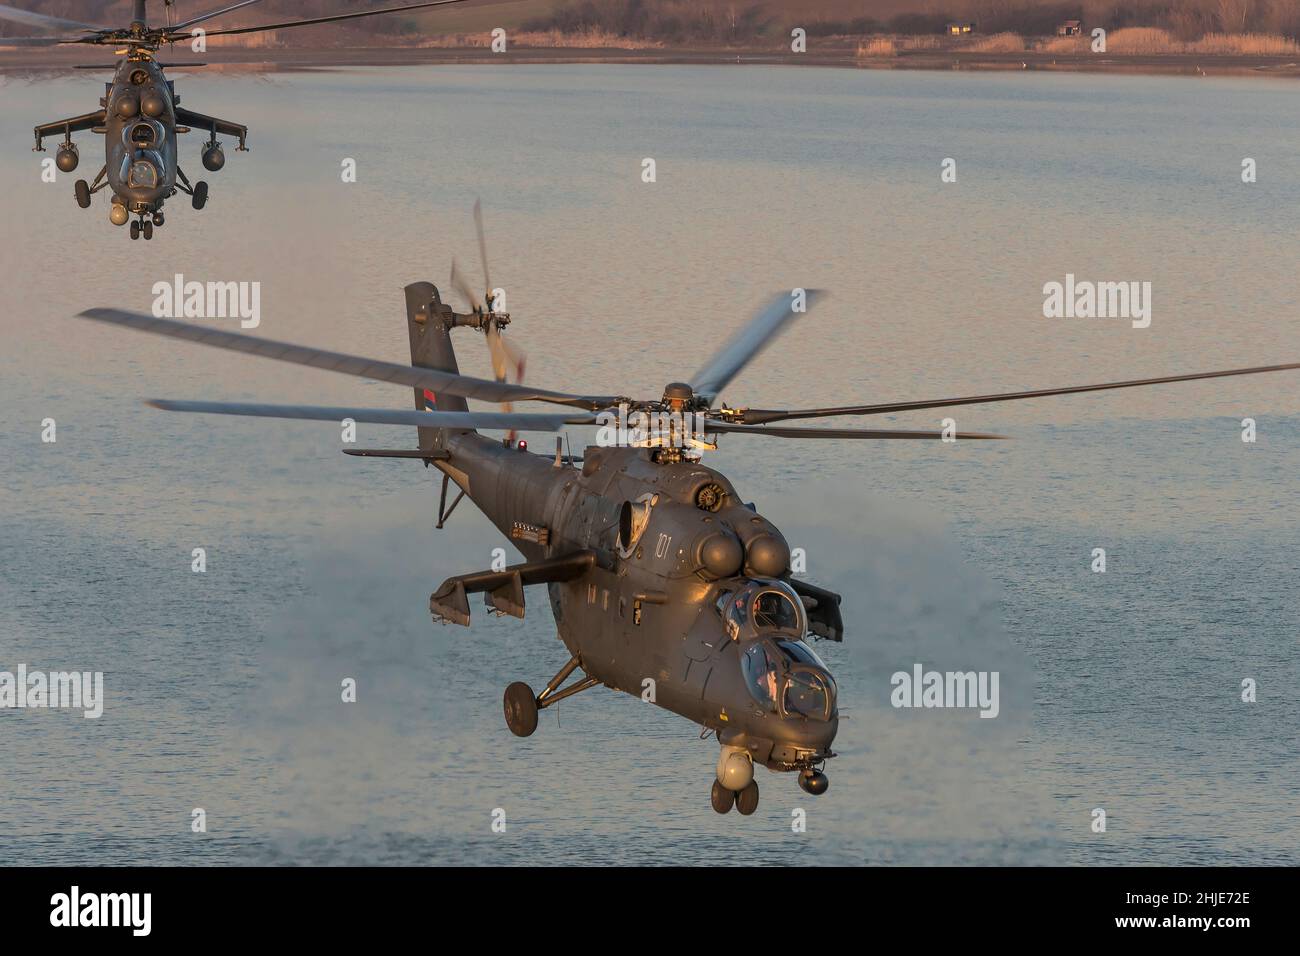 Serbian Air Force Russian Helicopters Mil MI/35M *NATO reporting name: Hind) combat helicopters gunships in flight over water Stock Photo